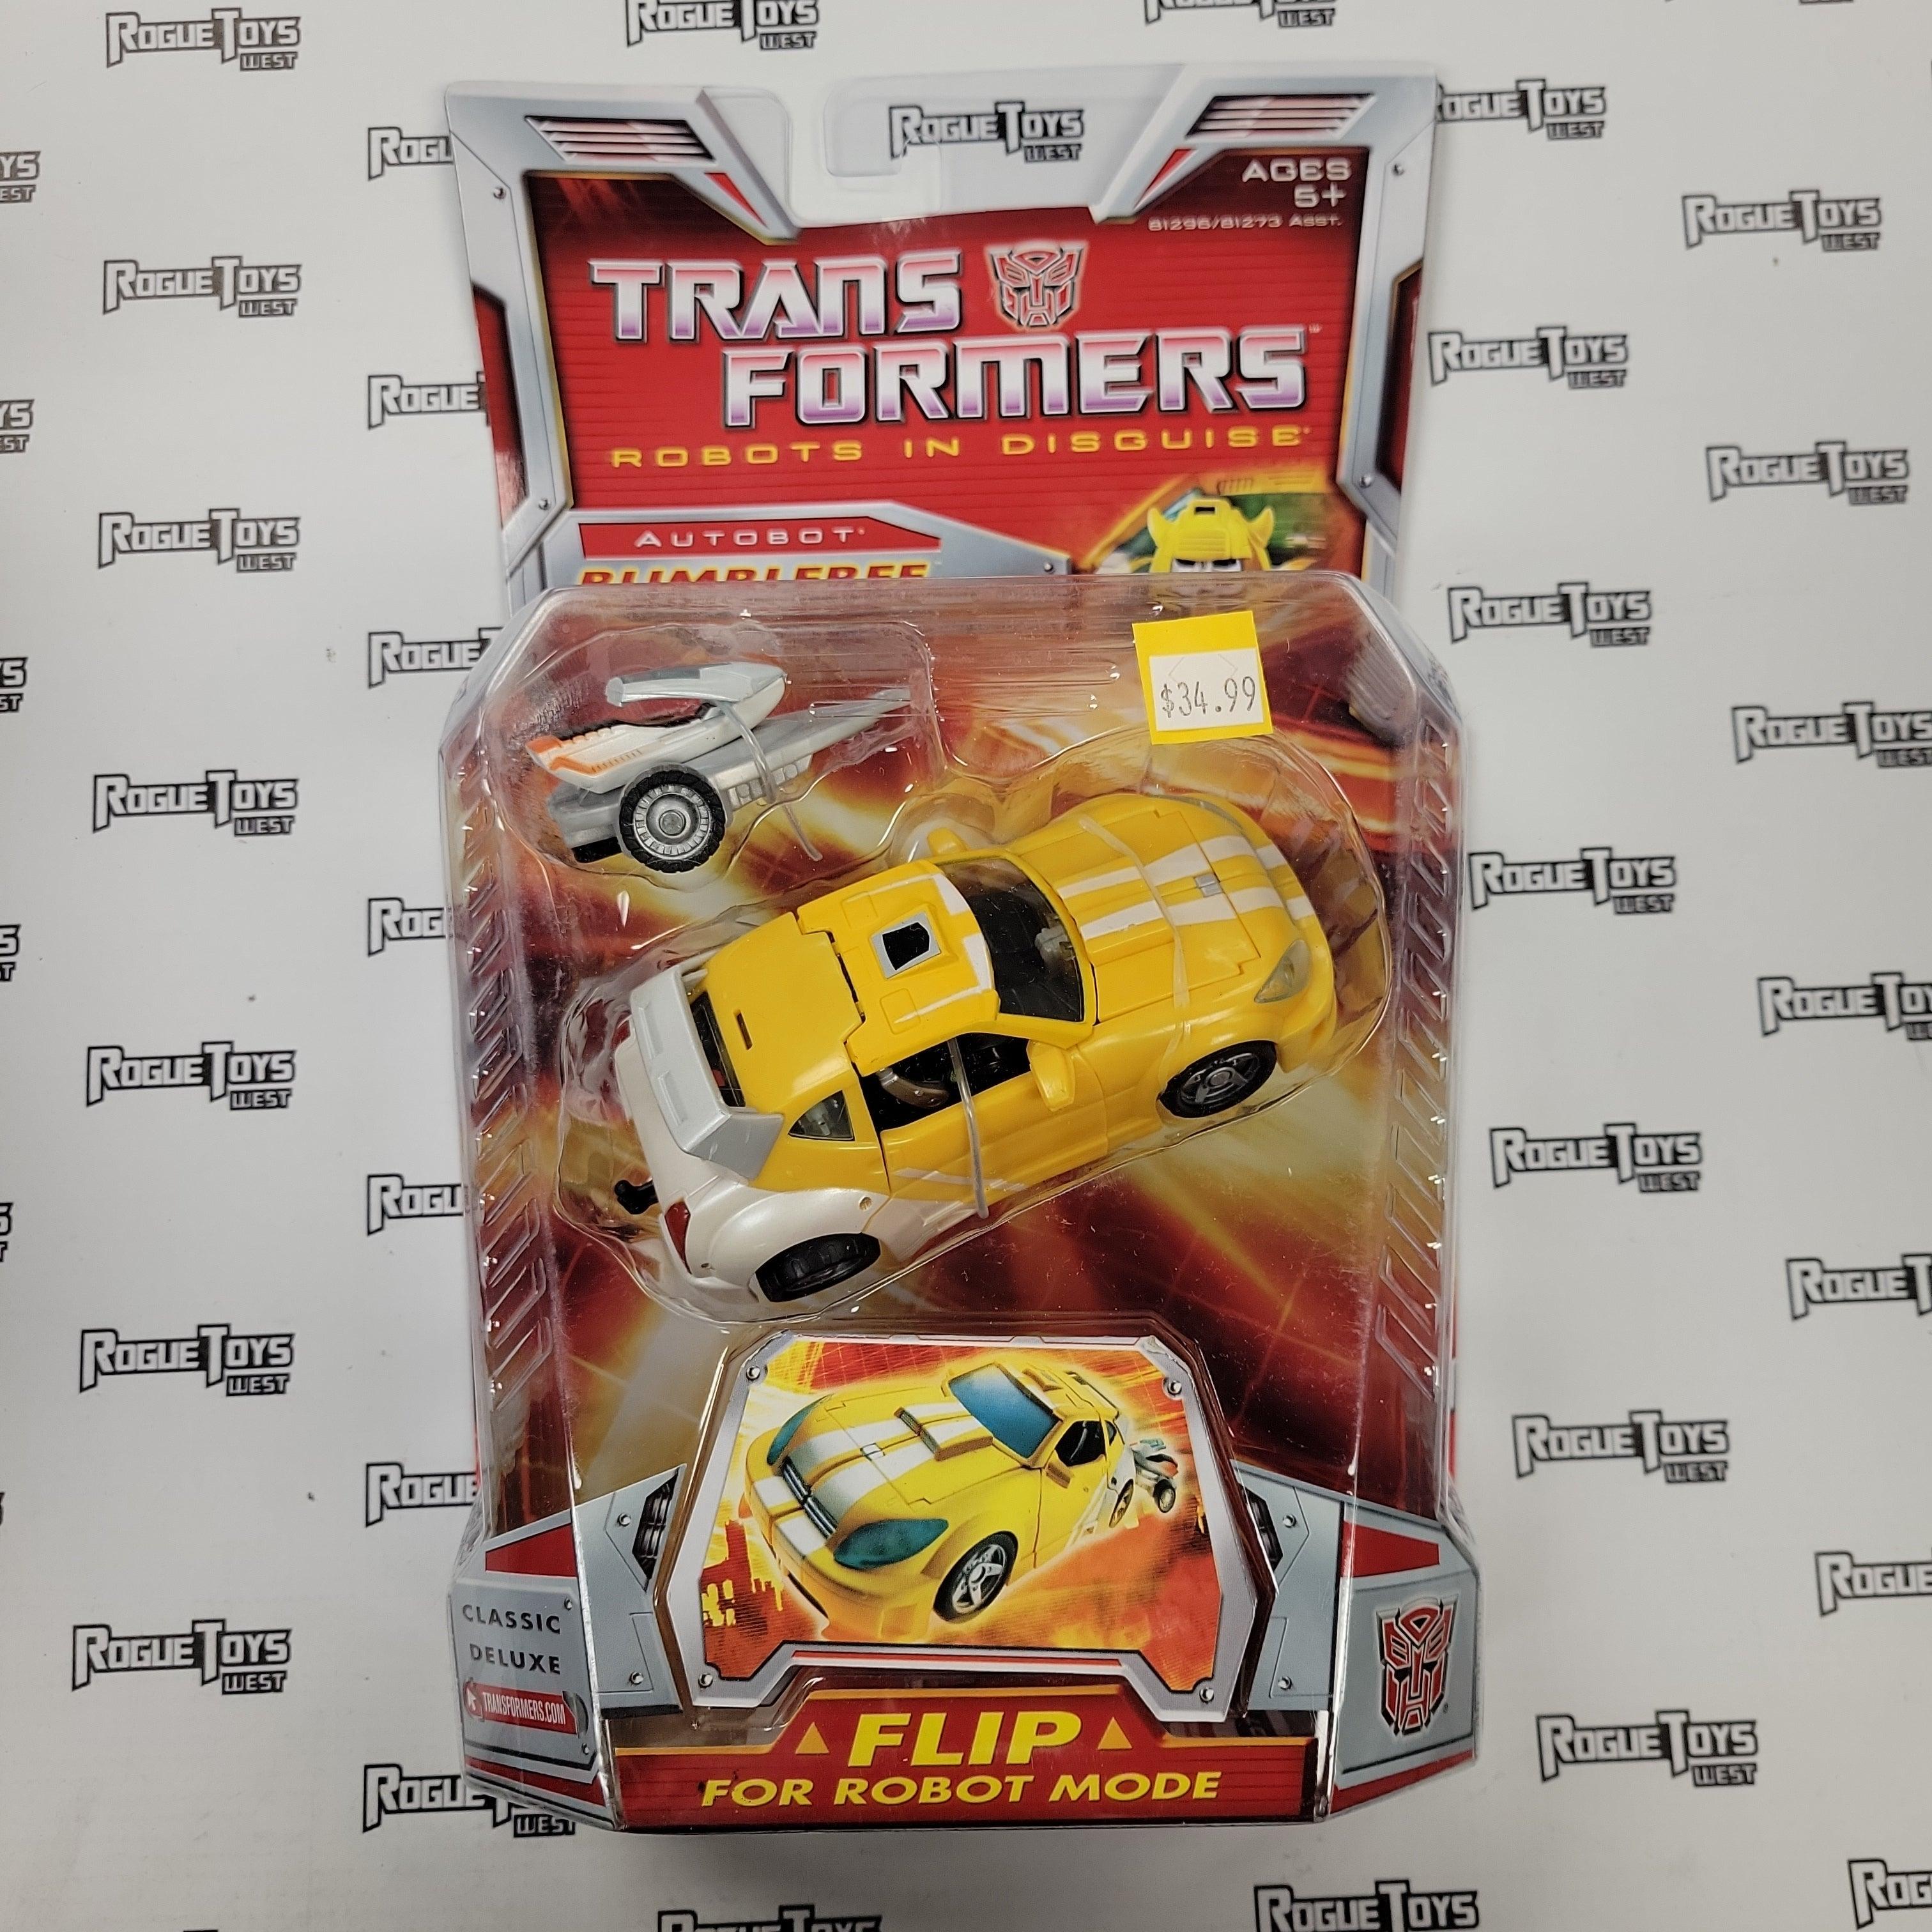 HASBRO Transformers: Robots in Disguise (2006), Classic Deluxe Autobot Bumblebee